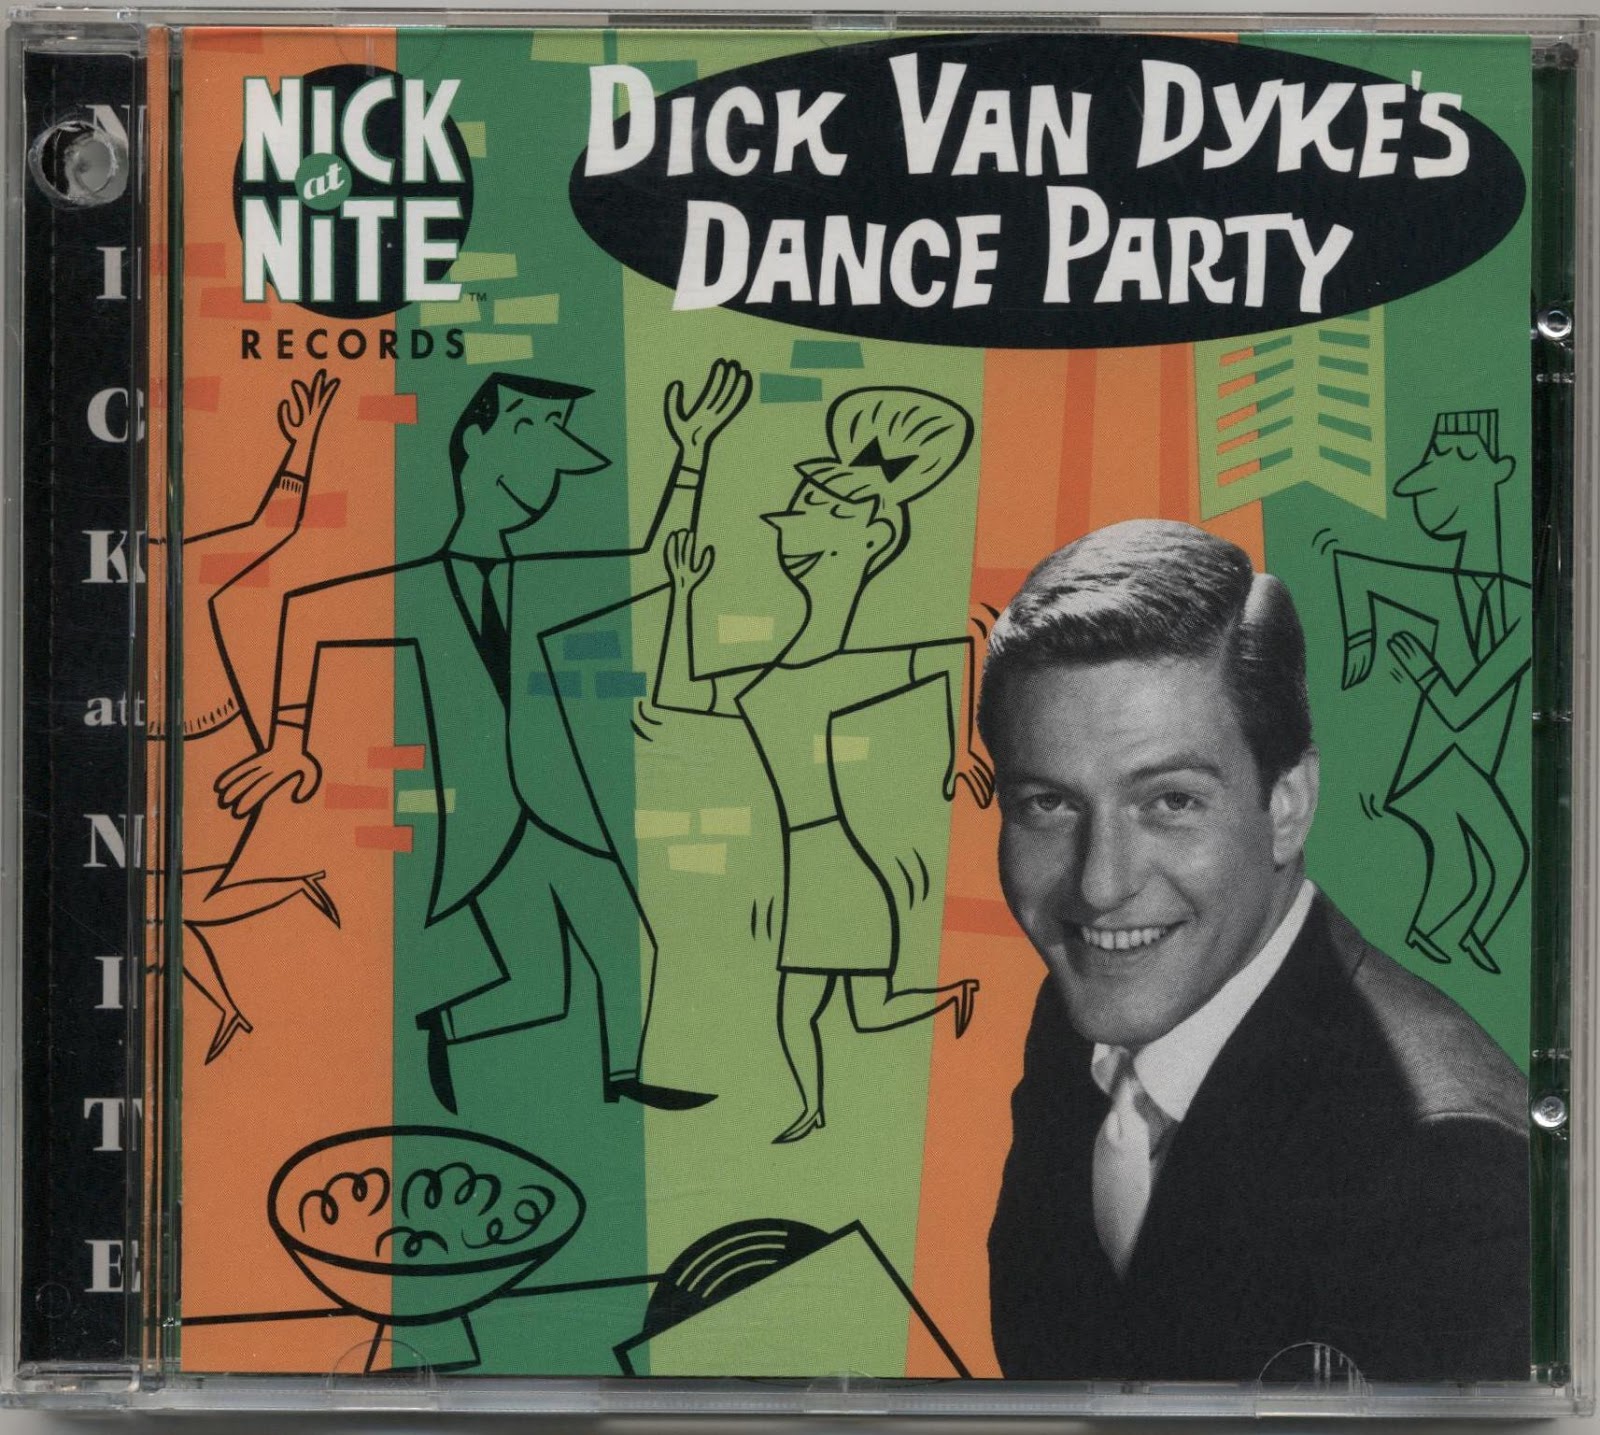 A little down in the mouth dick van dyke